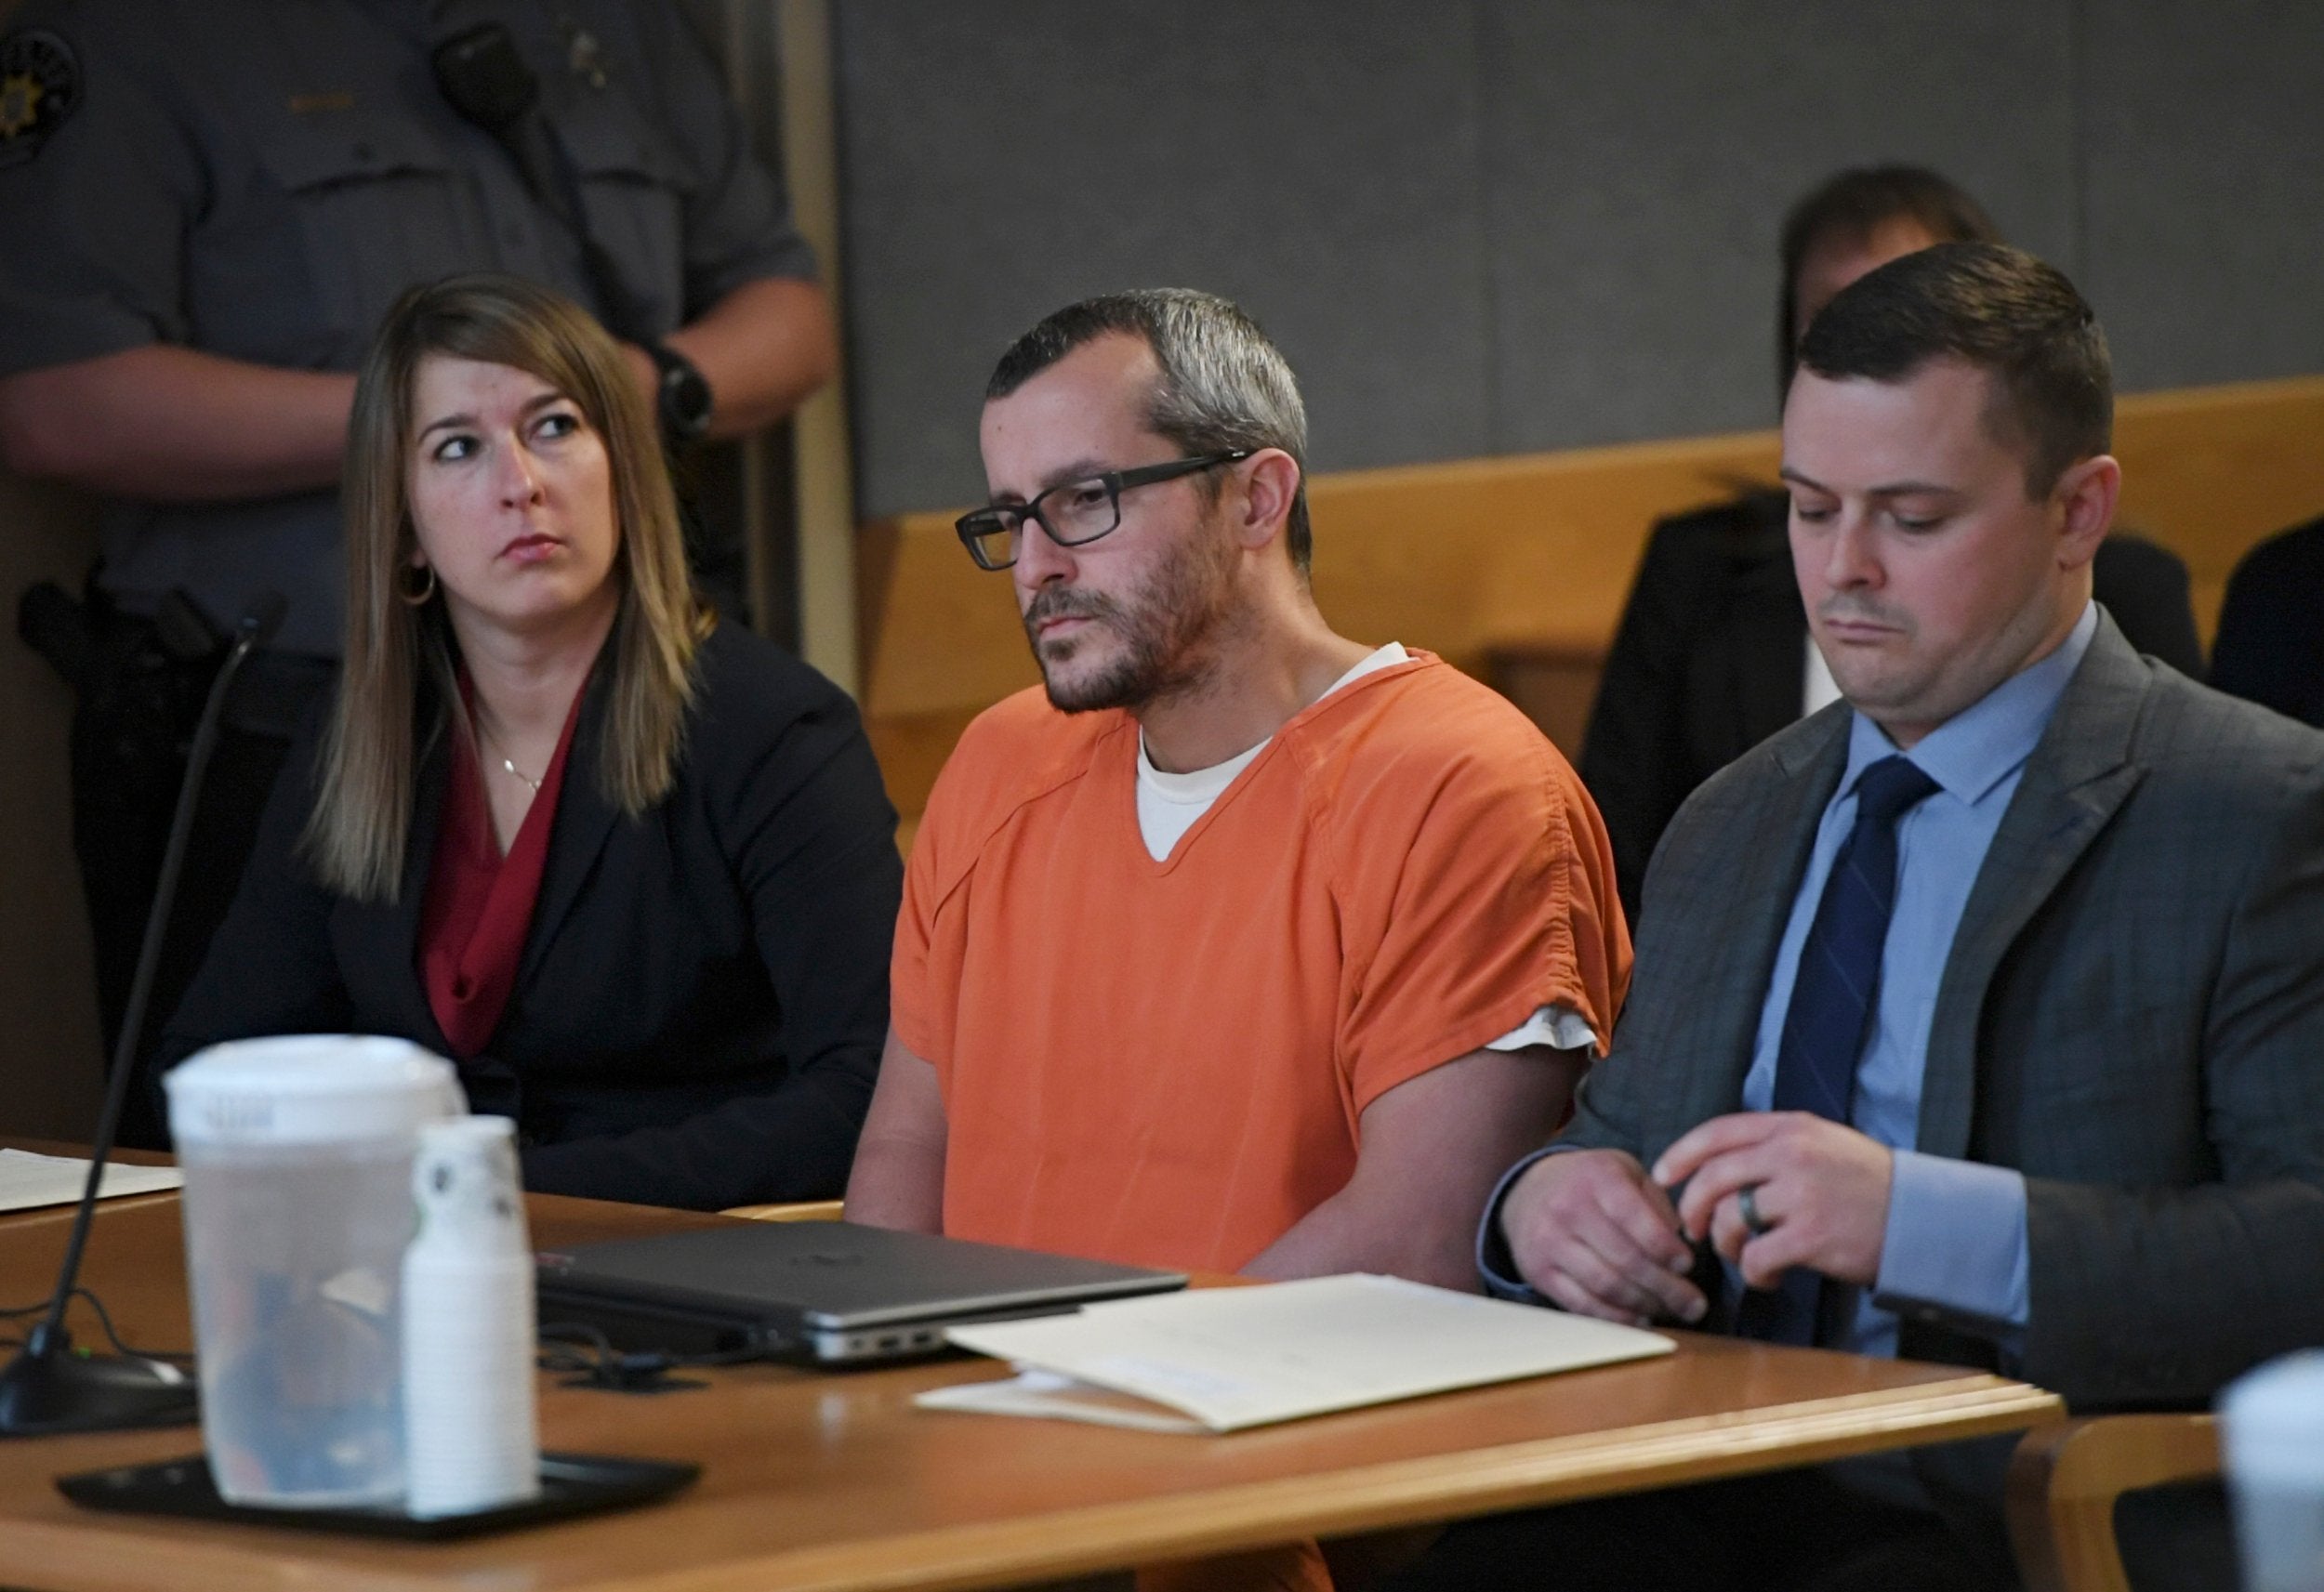 Christopher Watts sits in court for his sentencing hearing at the Weld County Courthouse on Monday 19 November 2018 in Greeley, Colorado (RJ Sangosti/The Denver Post via